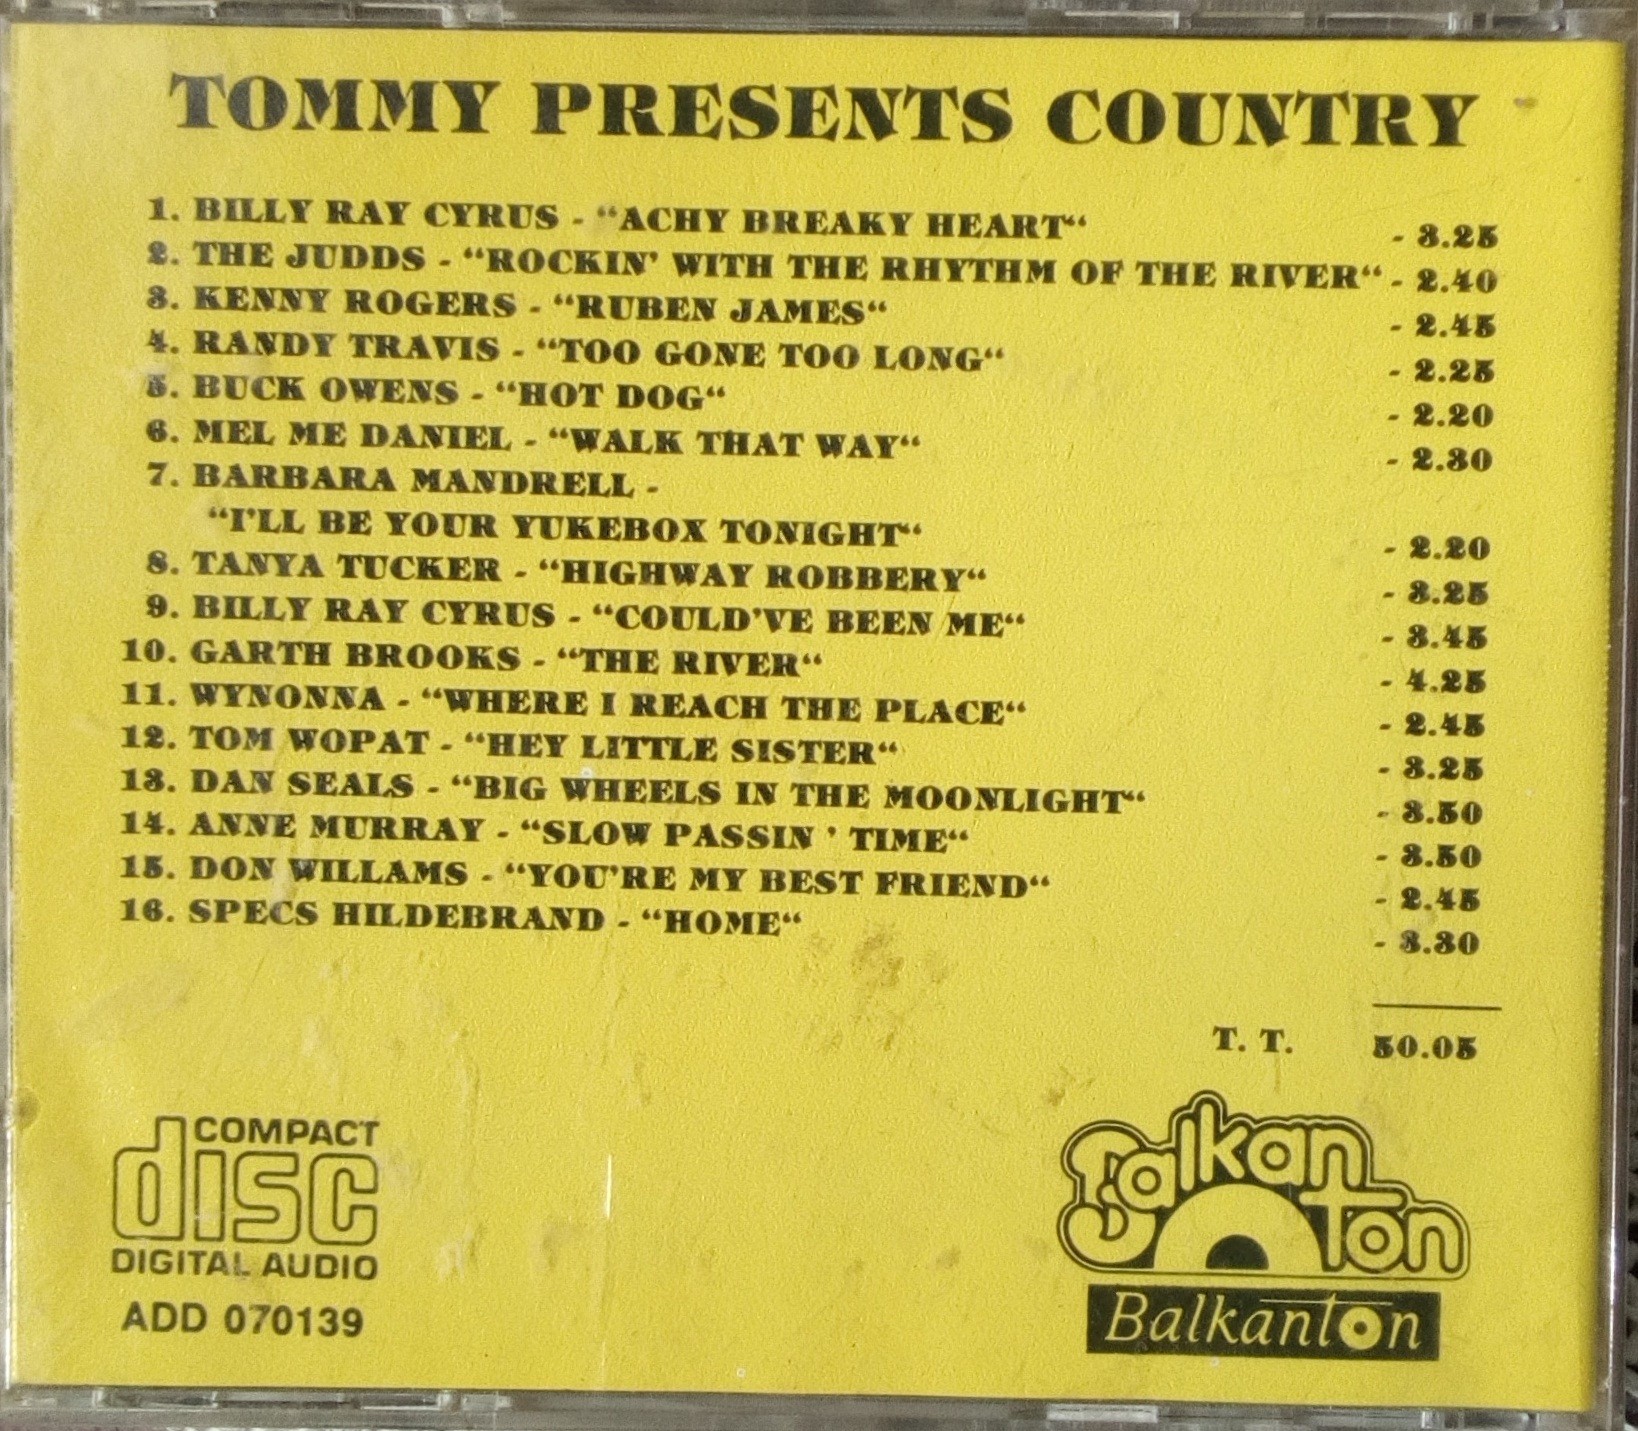 Tommy presents country